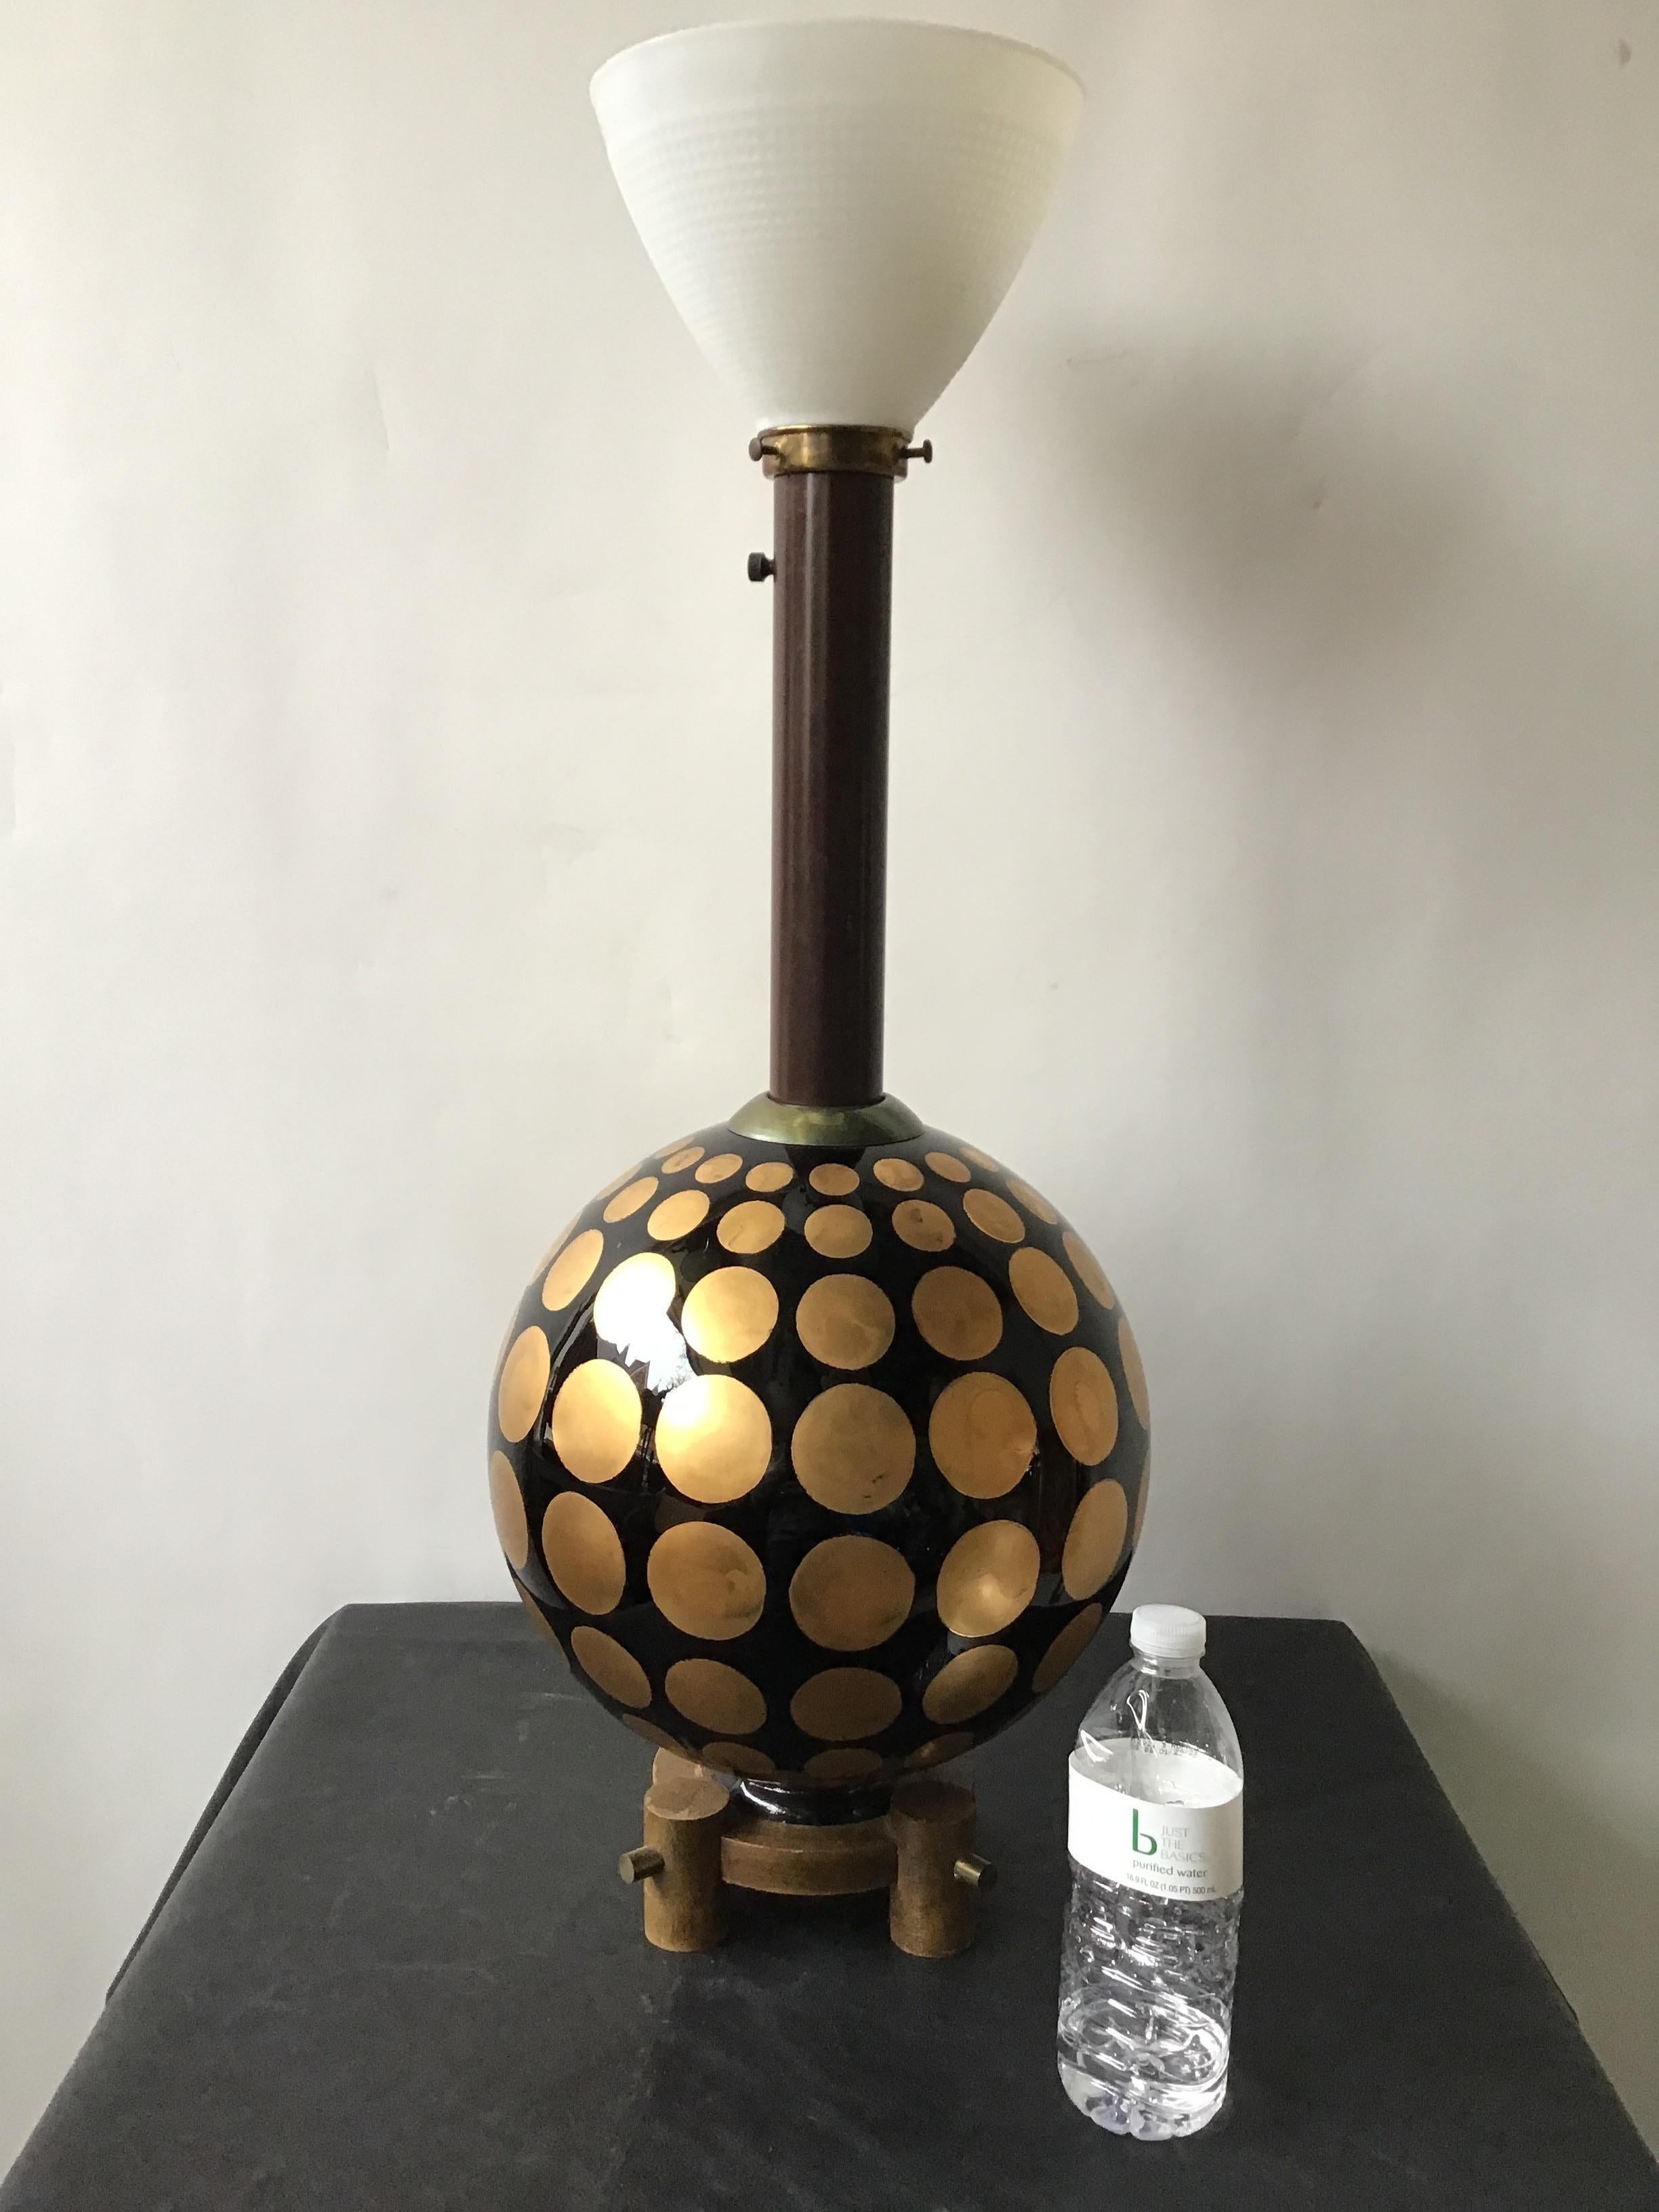 1950s round glass lamp with hand painted gold circles. On wood base with brass accents.